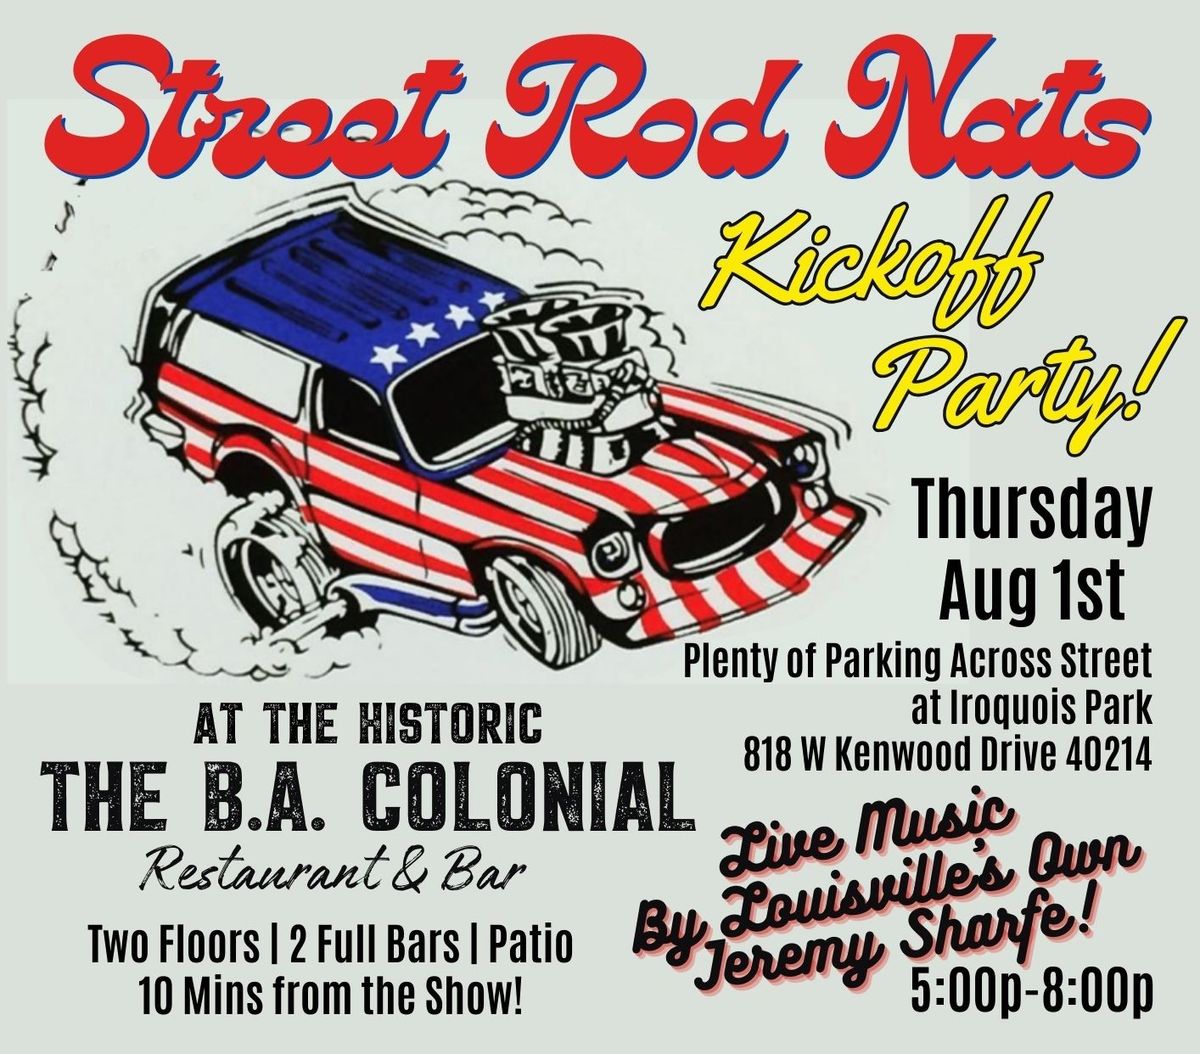 Street Rod Nationals Kickoff w\/Live Music by Jeremy Sharfe